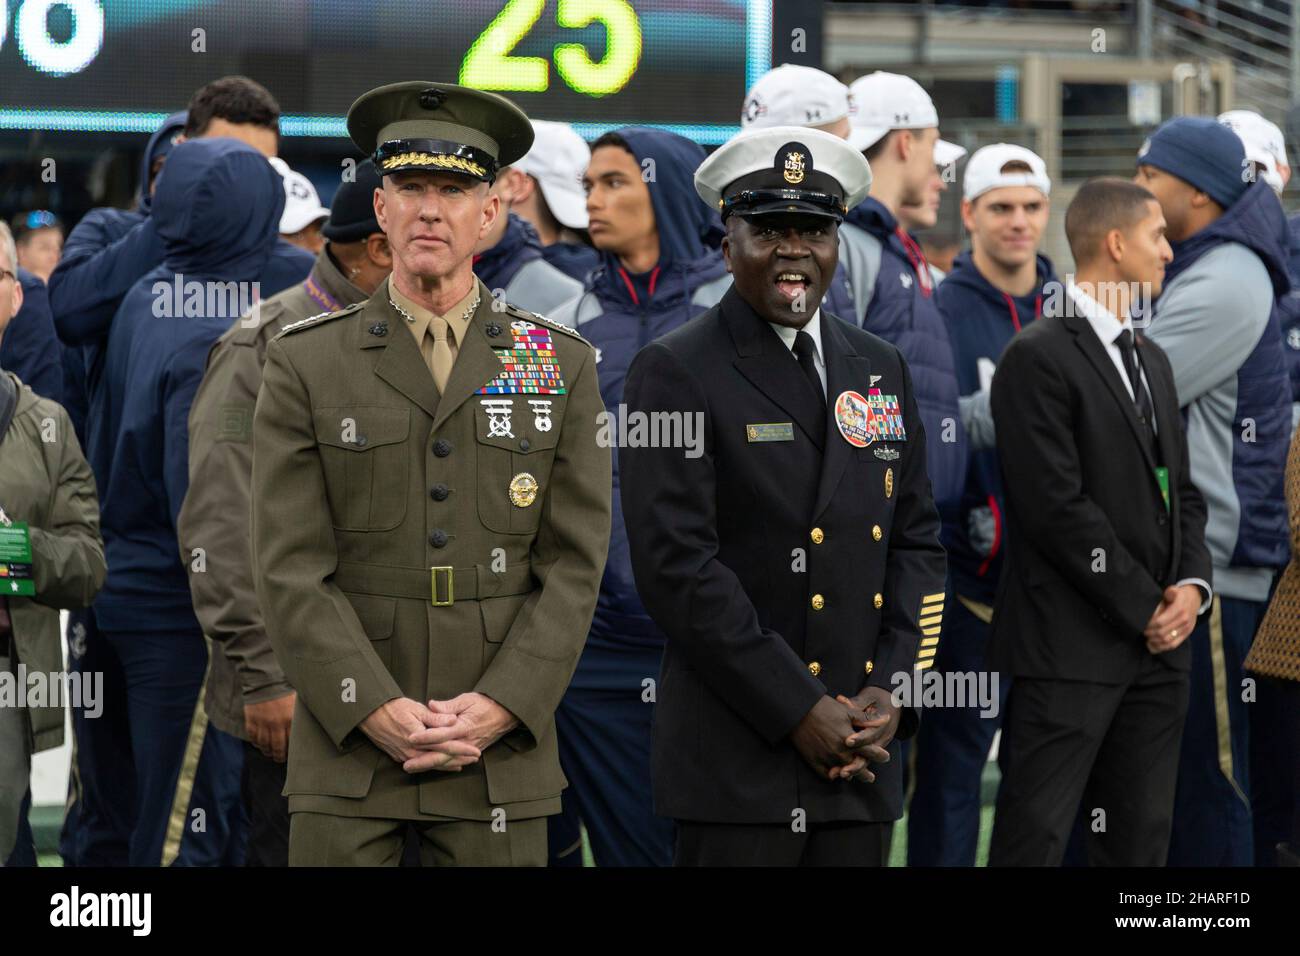 East Rutherford, United States of America. 11 December, 2021. Commandant of the Marine Corps, General David H. Berger, left, before the start of the annual Army-Navy football game at Metlife Stadium December 11, 2021 in East Rutherford, New Jersey. The U.S. Naval Academy Midshipmen defeated the Army Black Knights 17-13 in their 122nd matchup.  Credit: Stacy Godfrey/U.S. Navy Photo/Alamy Live News Stock Photo